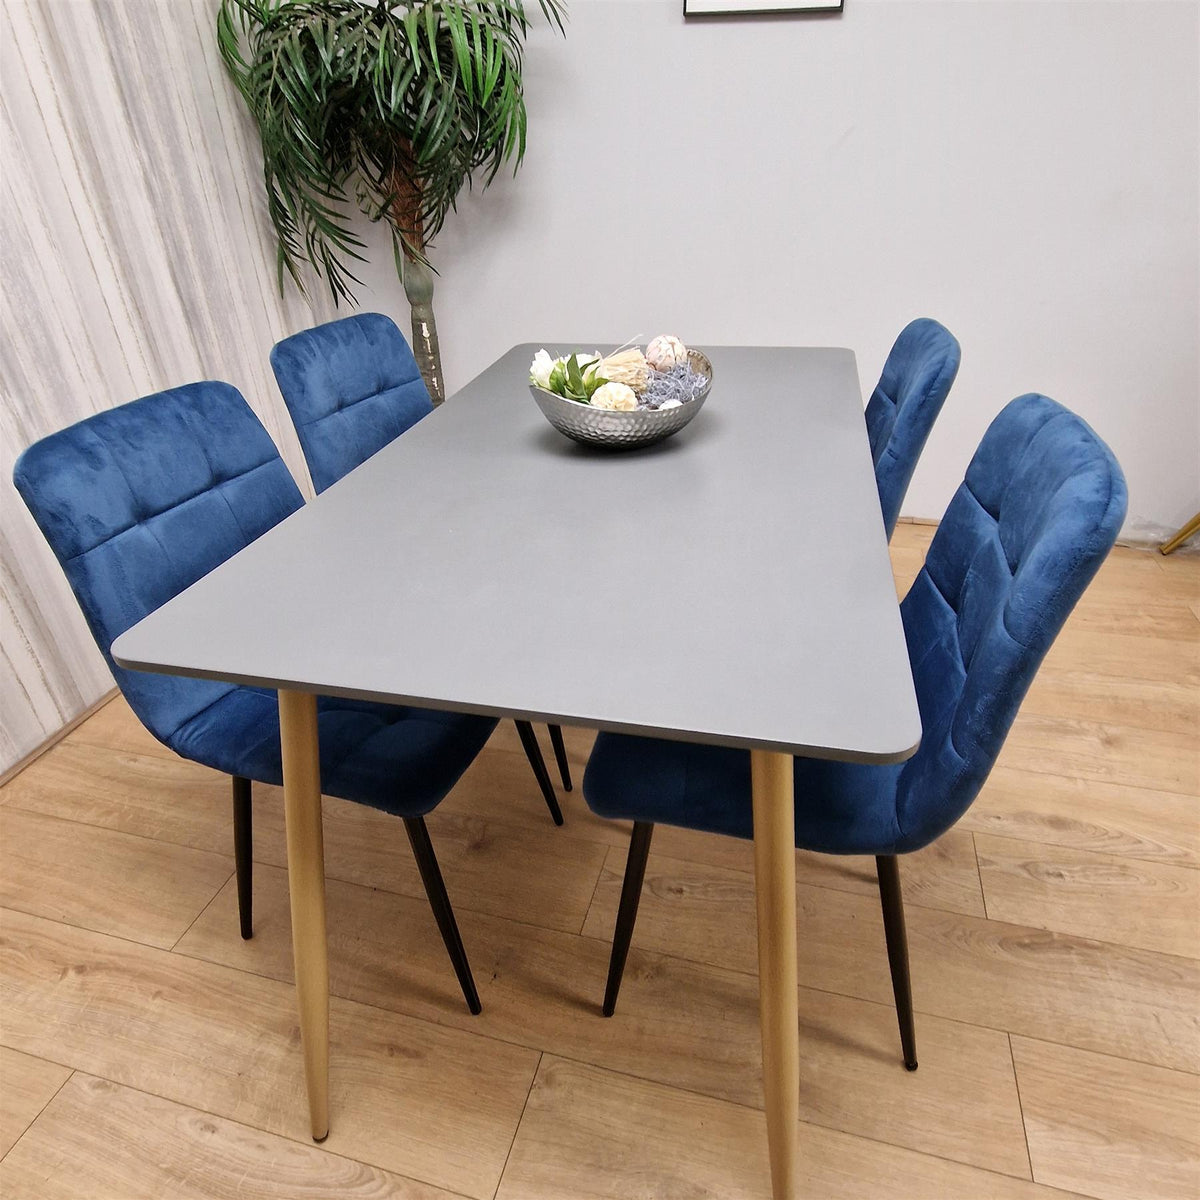 Wooden Dining Table Set for 4 Grey Wooden Table and 4 Blue Velvet Chairs